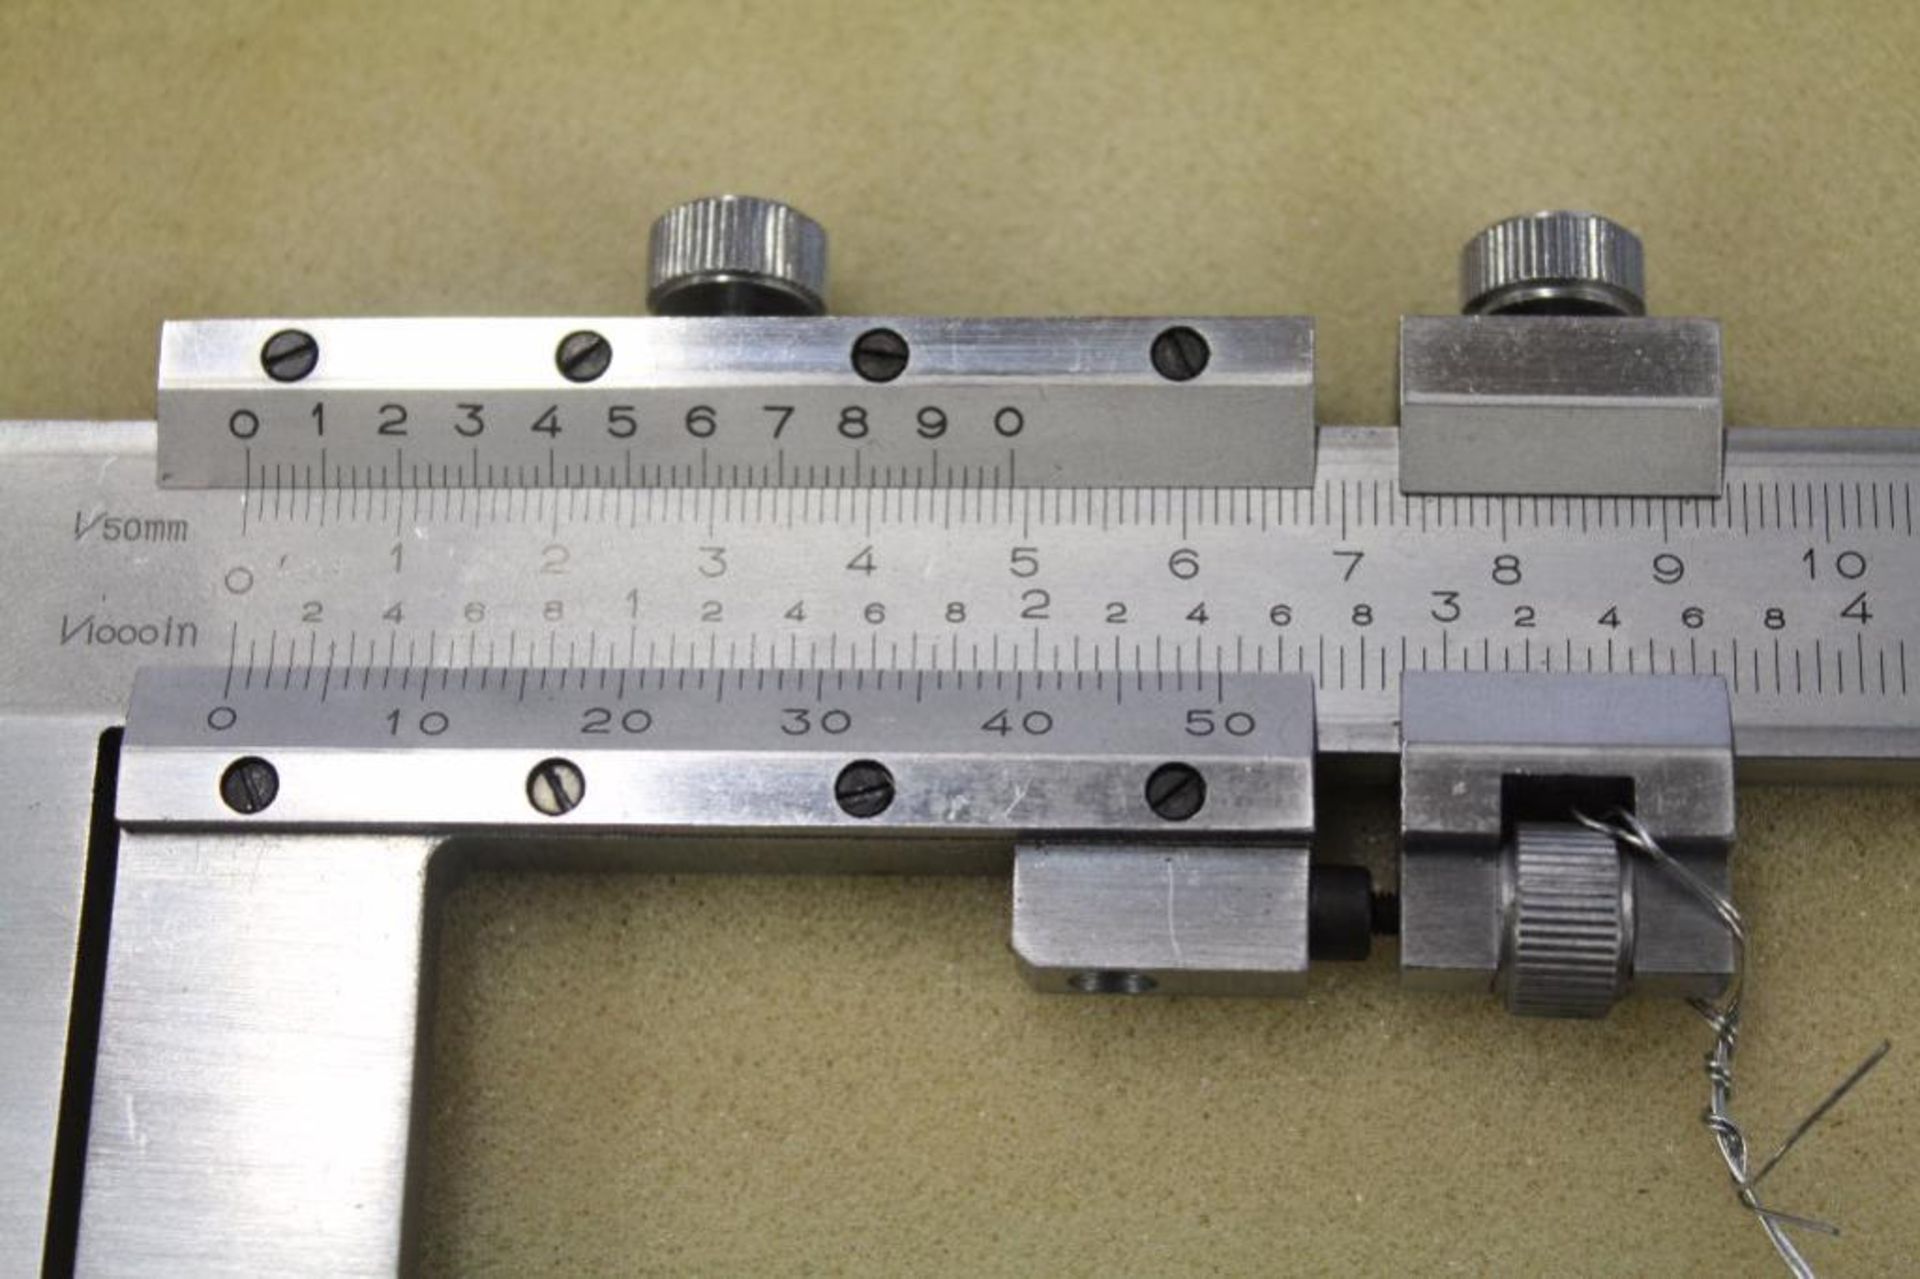 24 inch vernier calipers - Image 3 of 4